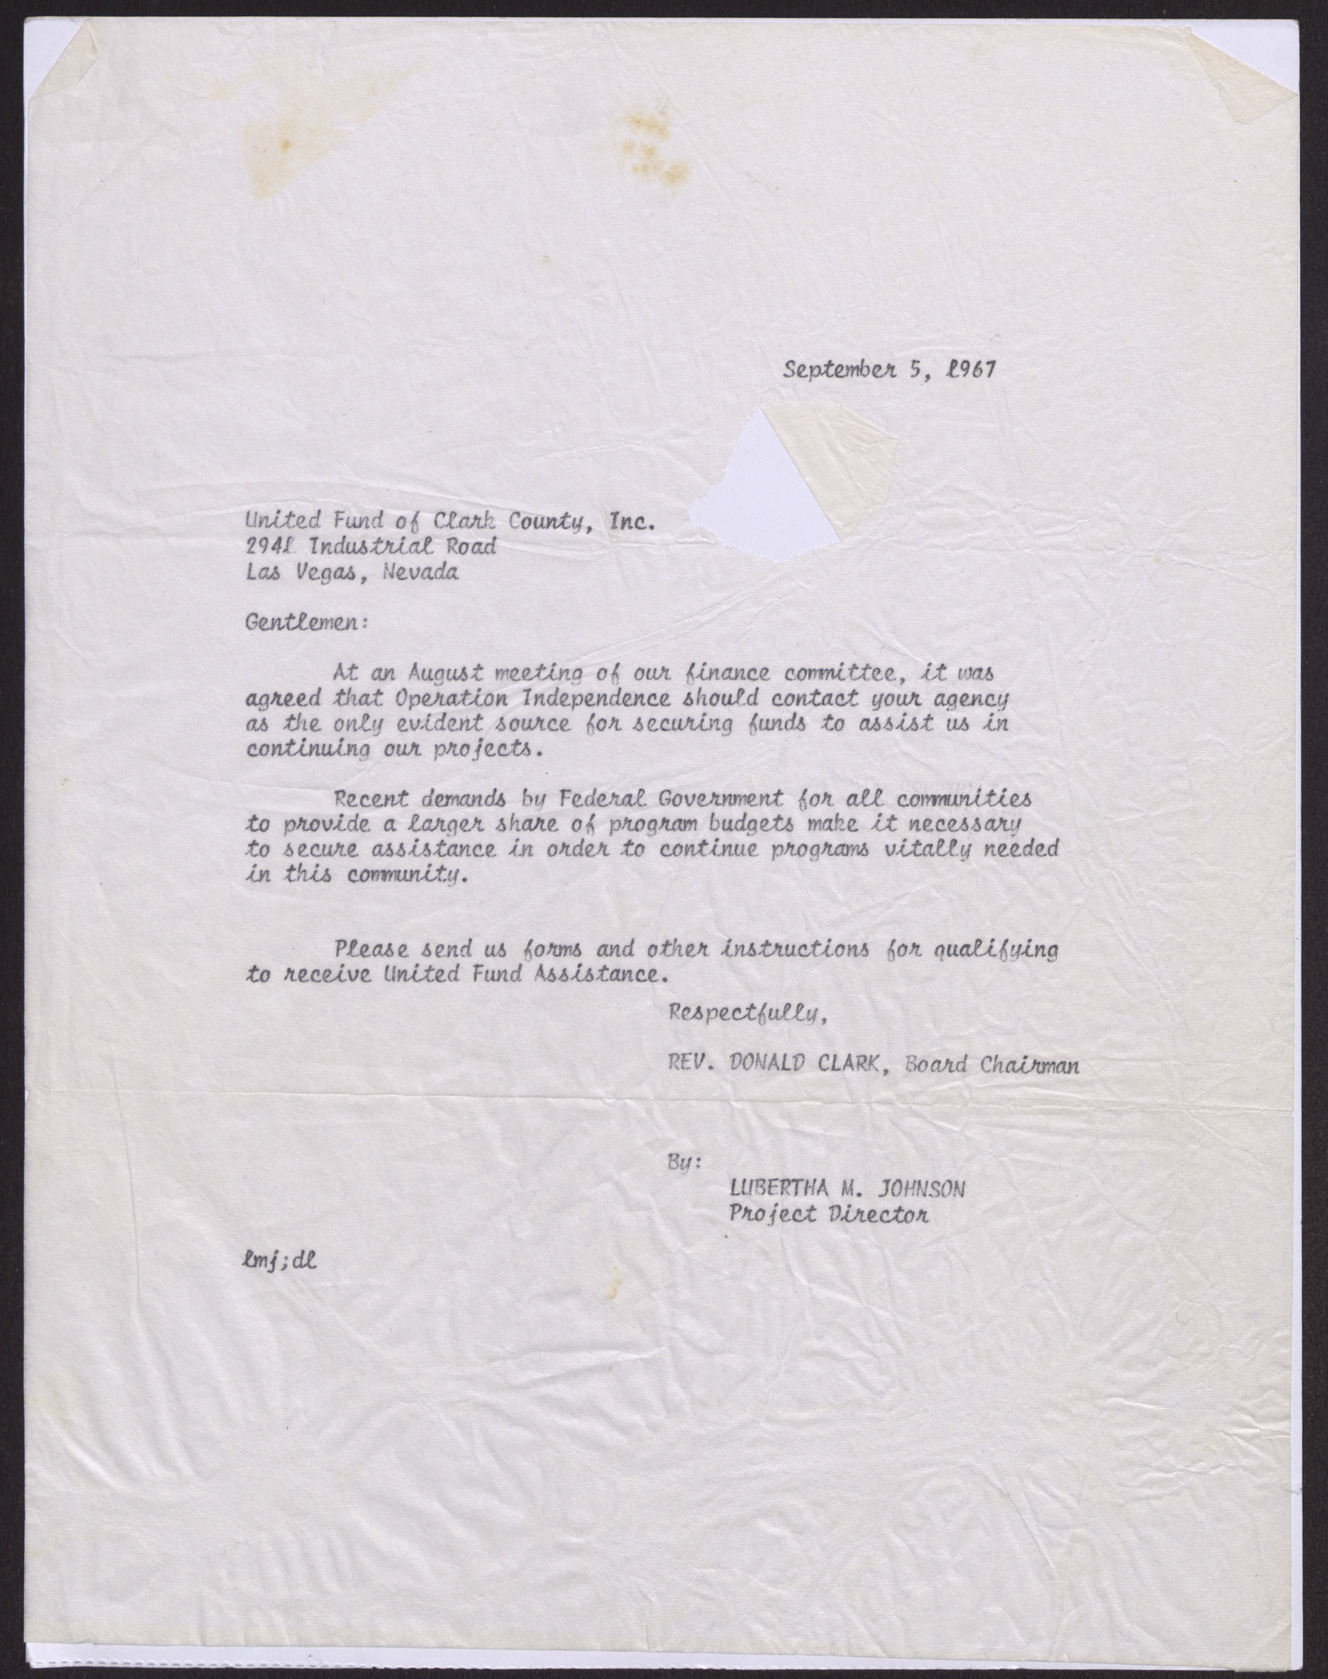 Letter to the United Fund of Clark County, Inc., from Lubertha M. Johnson, September 5, 1967